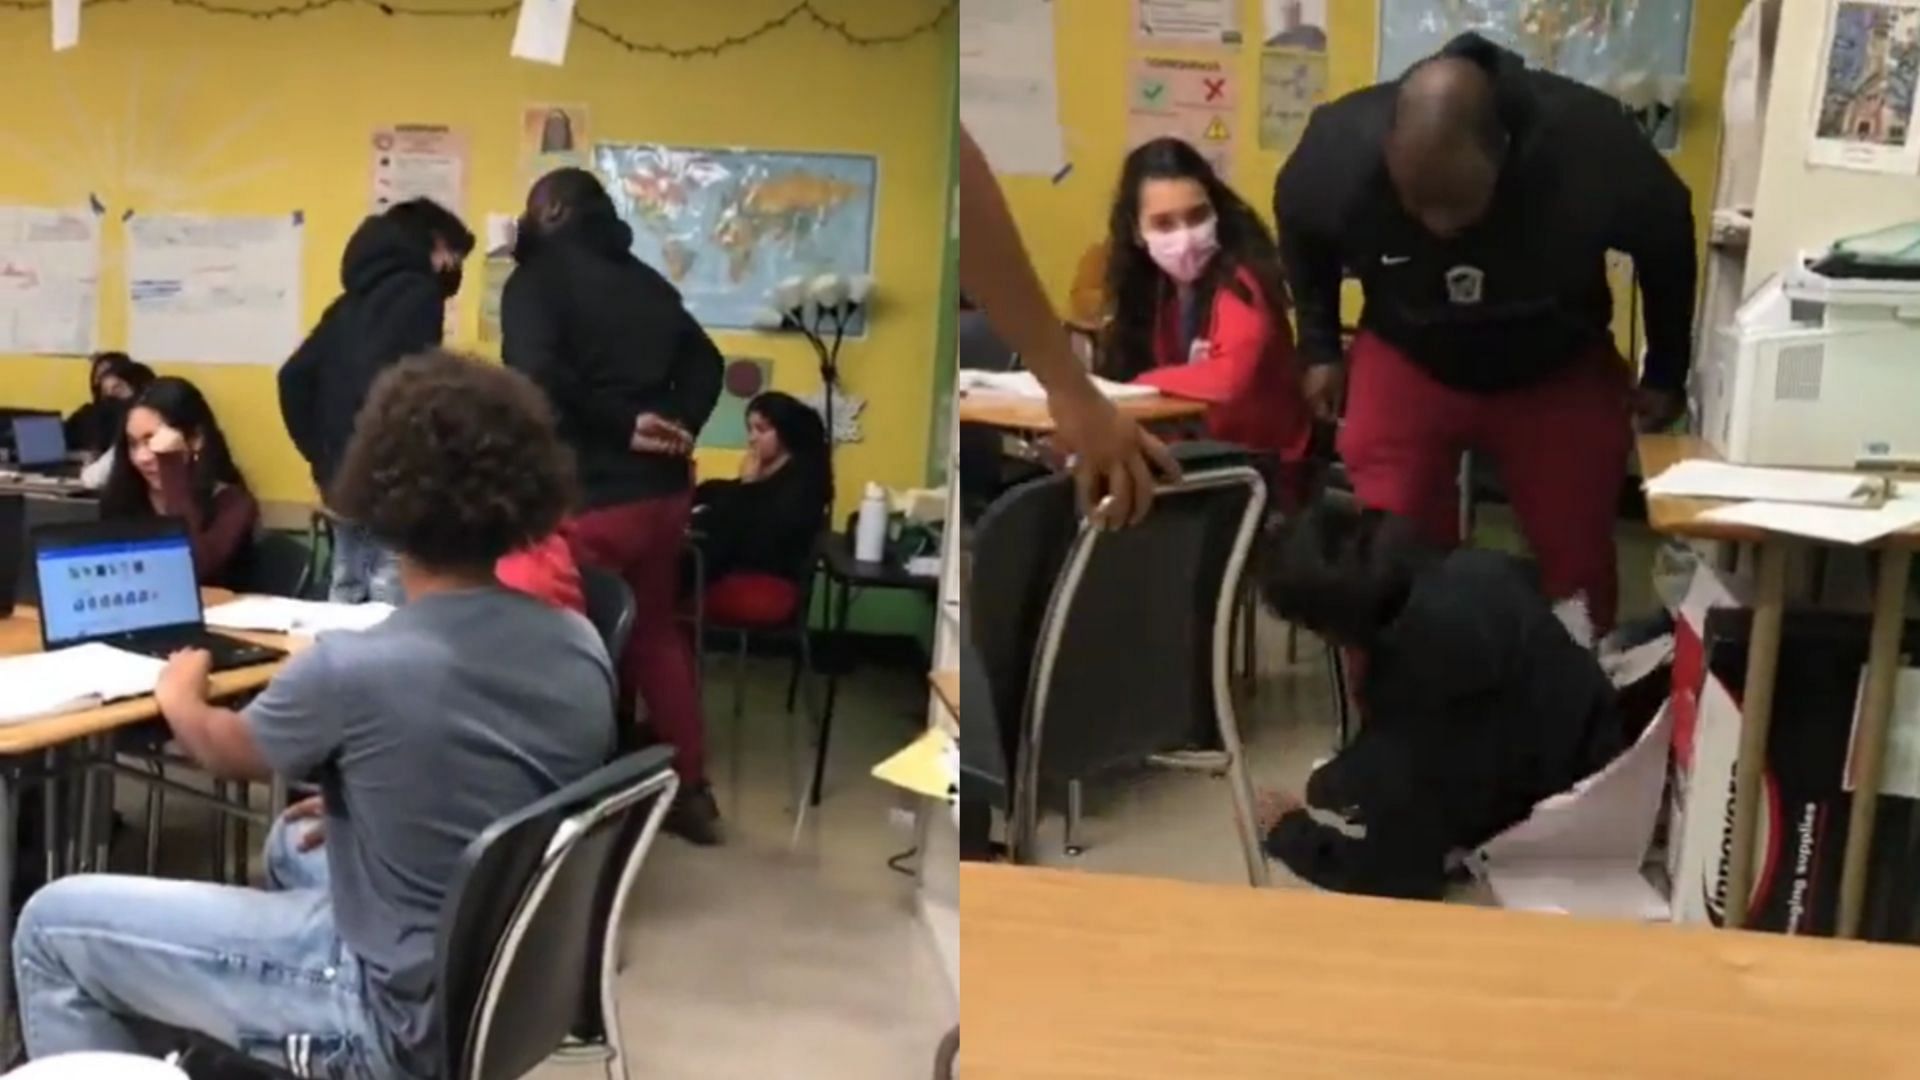 Richmond High School teacher fired after physically assaulting student who allegedly used racial slur (Image via LuisCam82062622/Twitter)